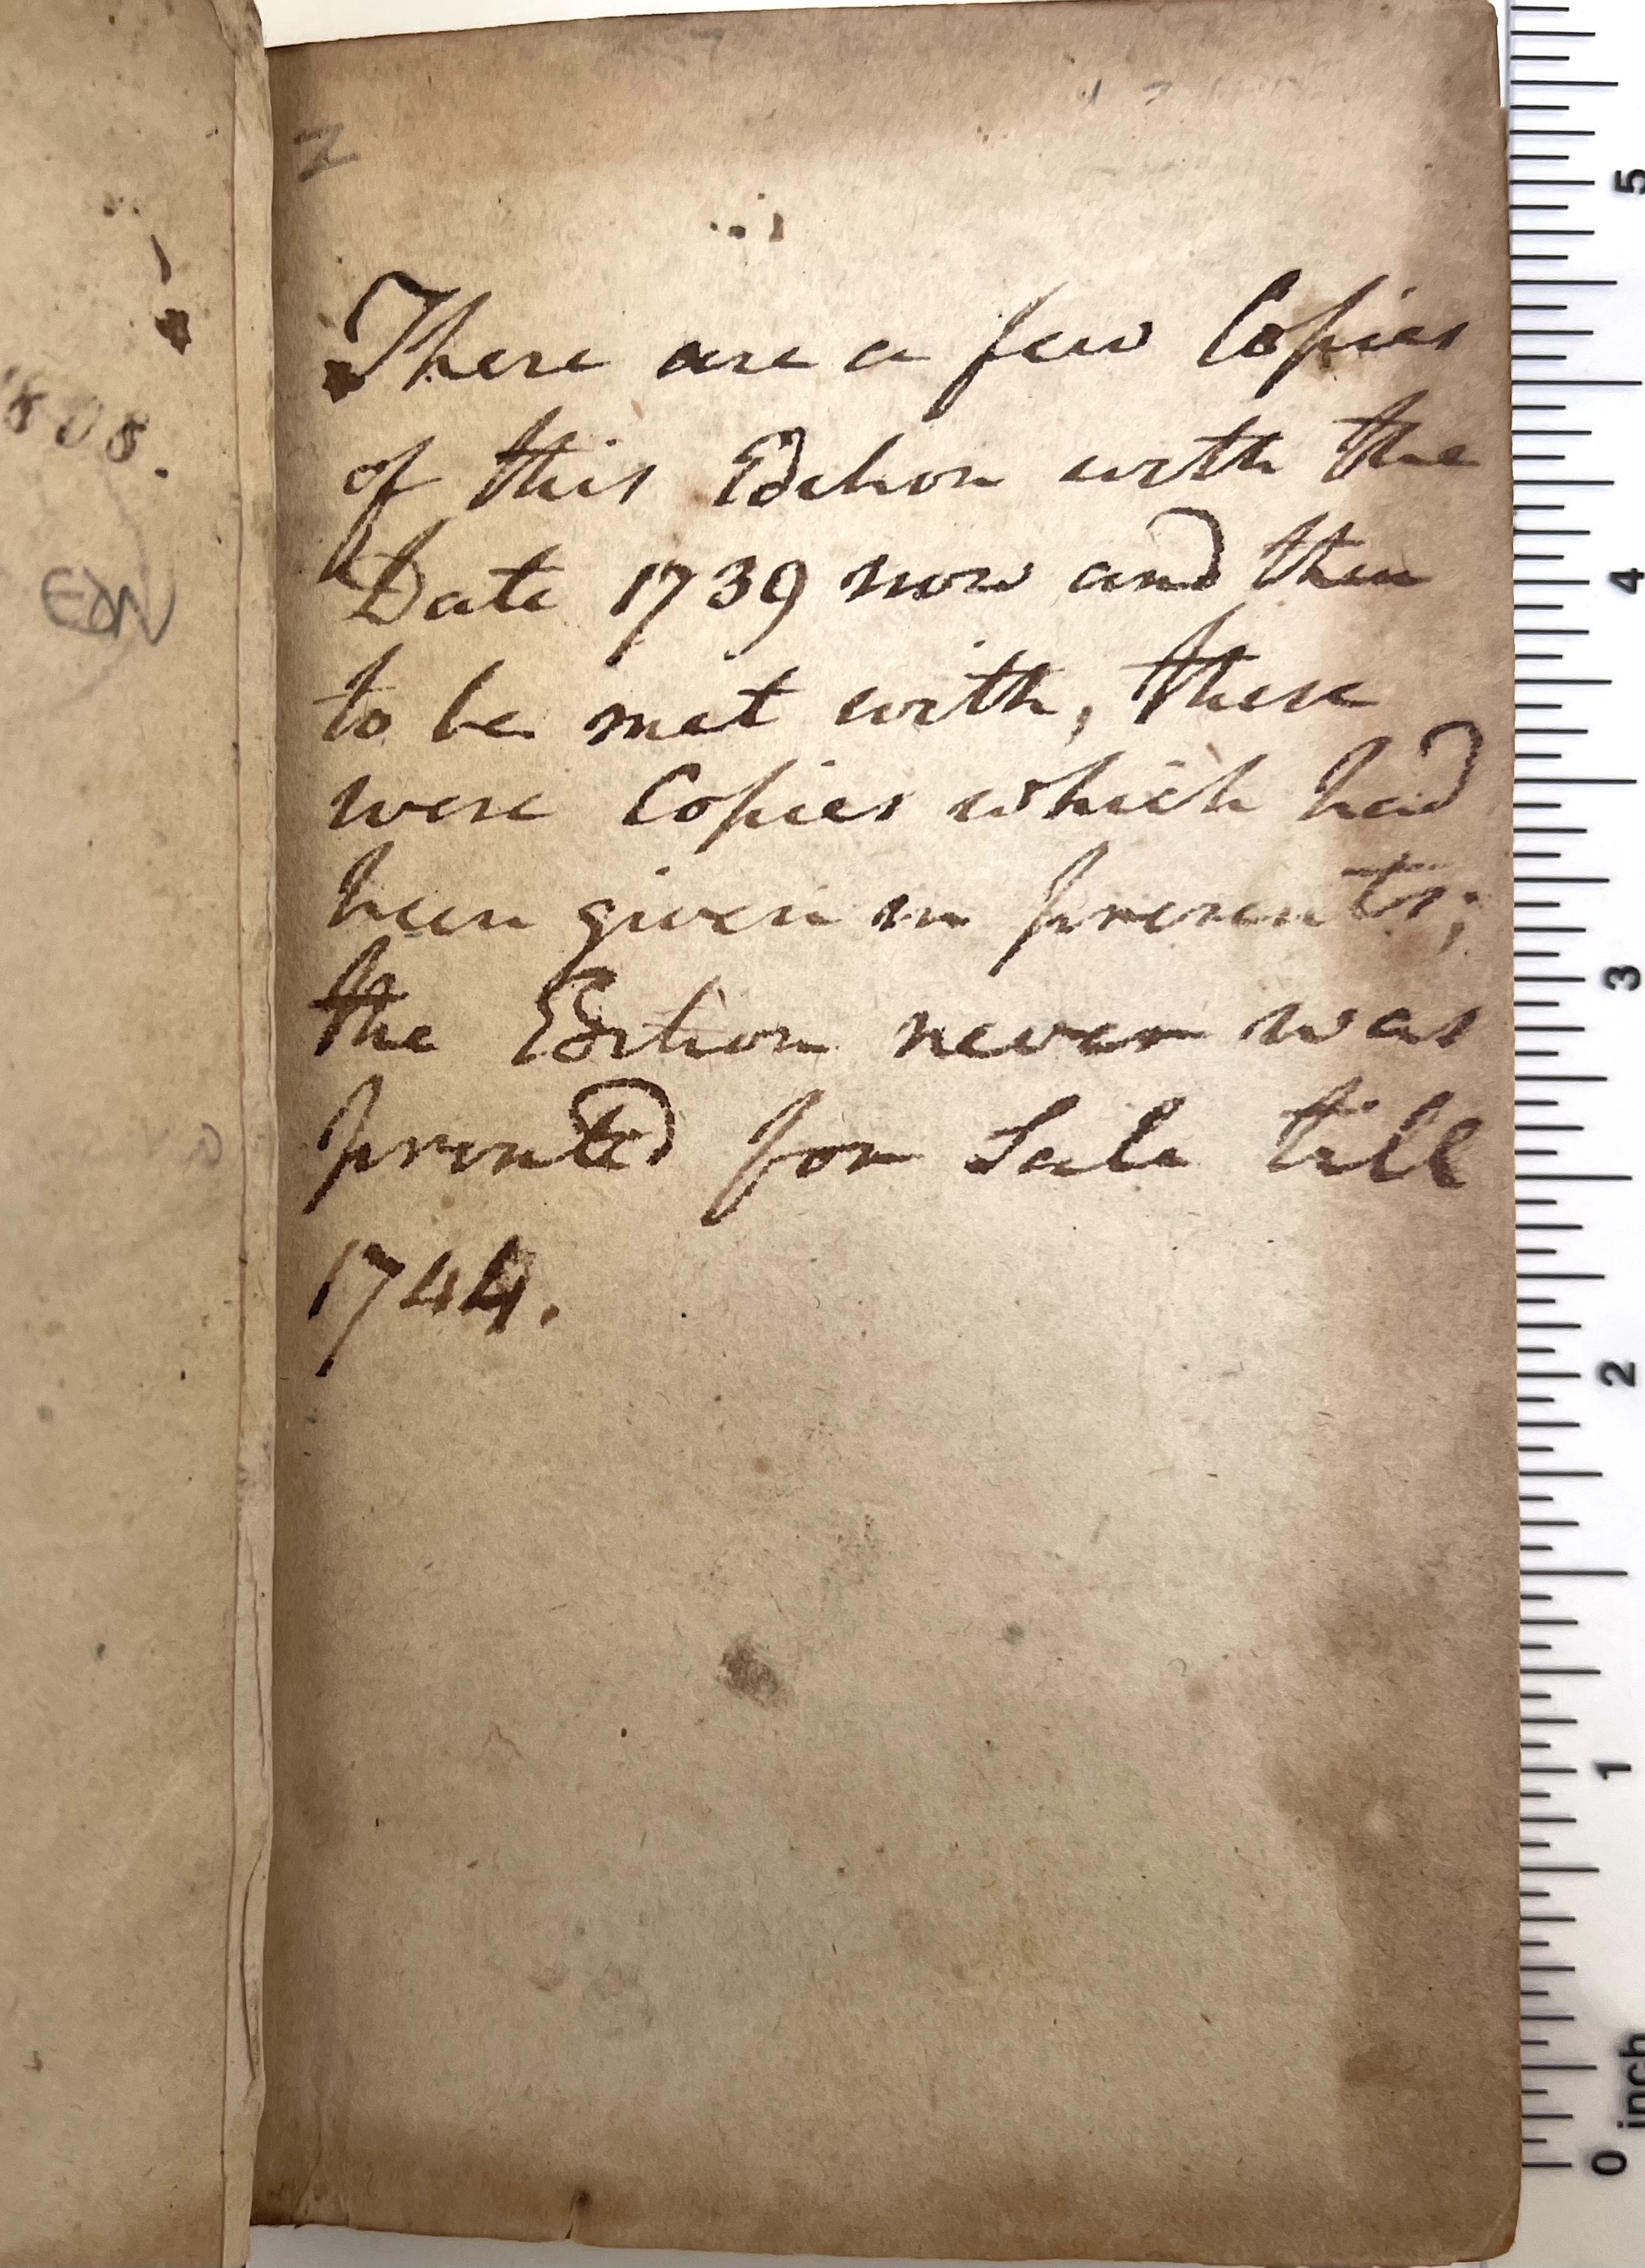 MS note about 1739 edition in the 1744 edition of Ged's Sallust